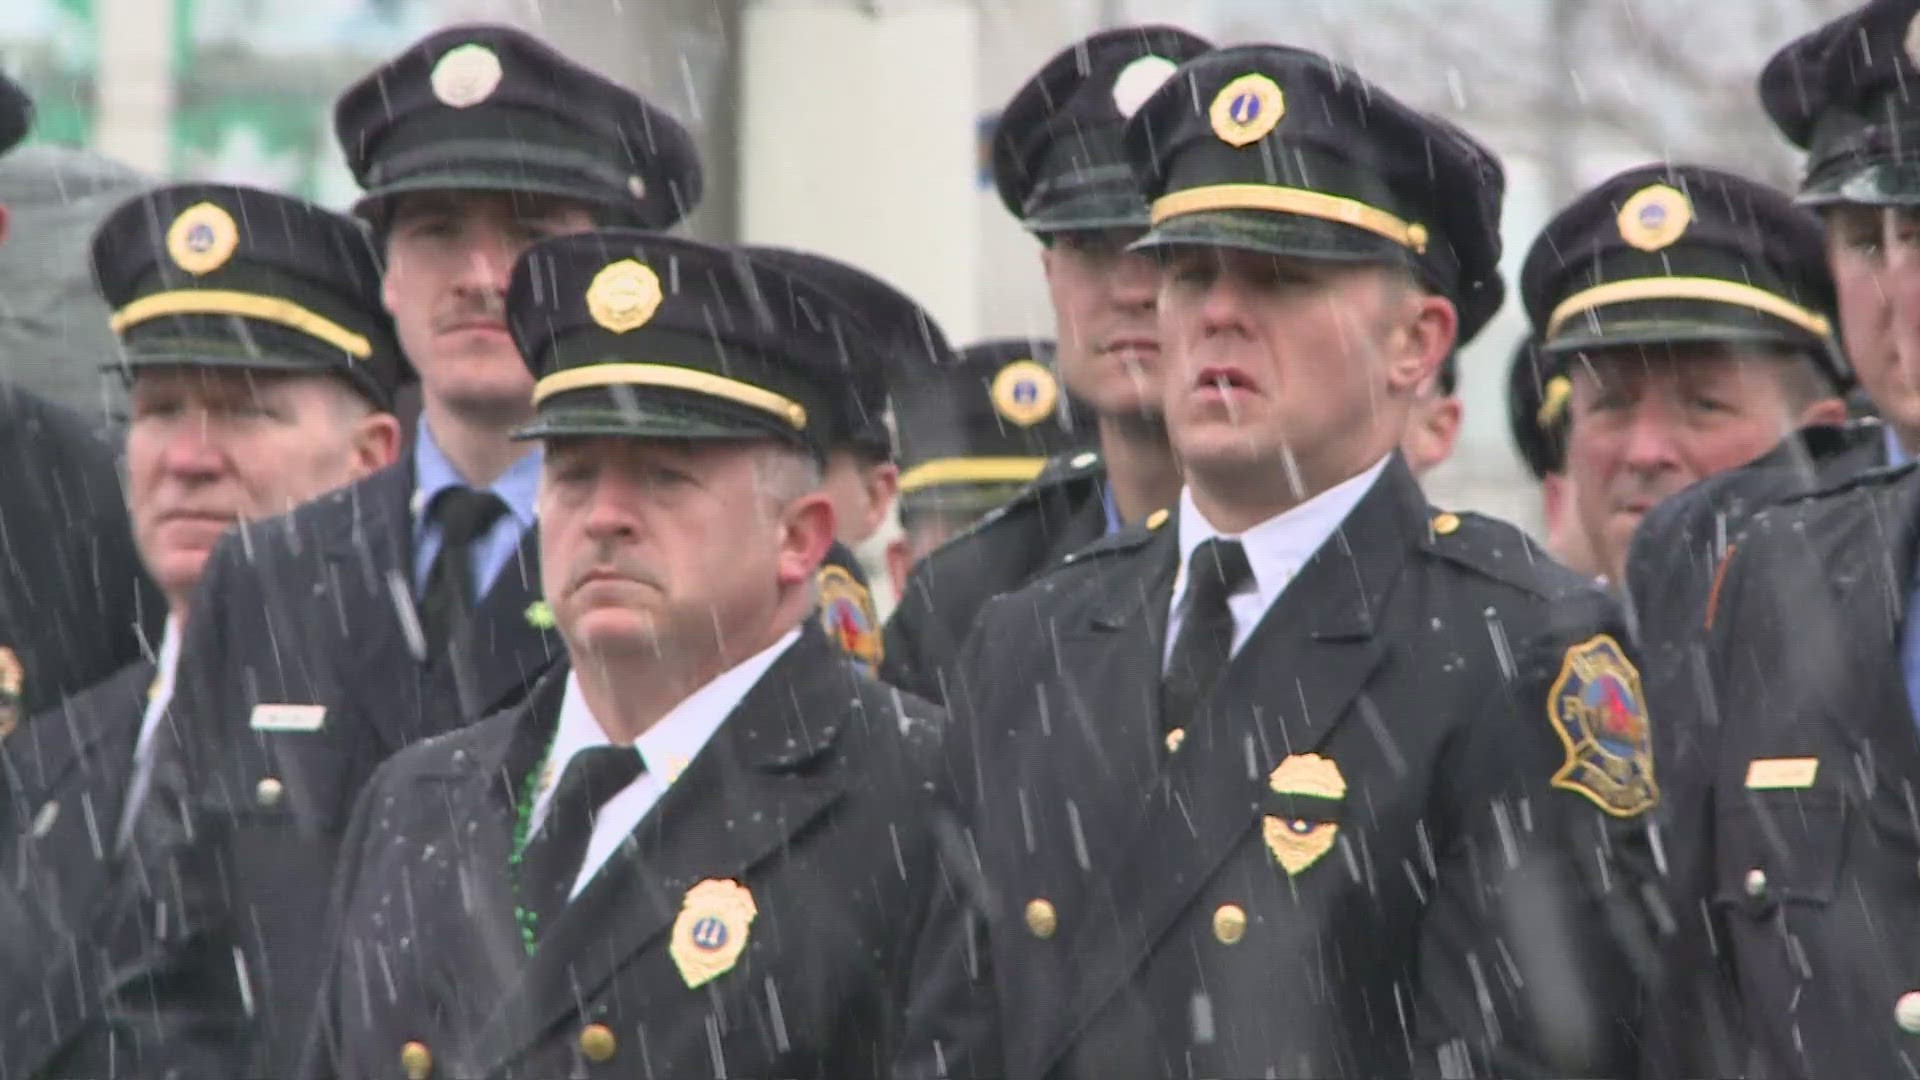 The service honored fallen firefighter Johnny Tetrick, among others.